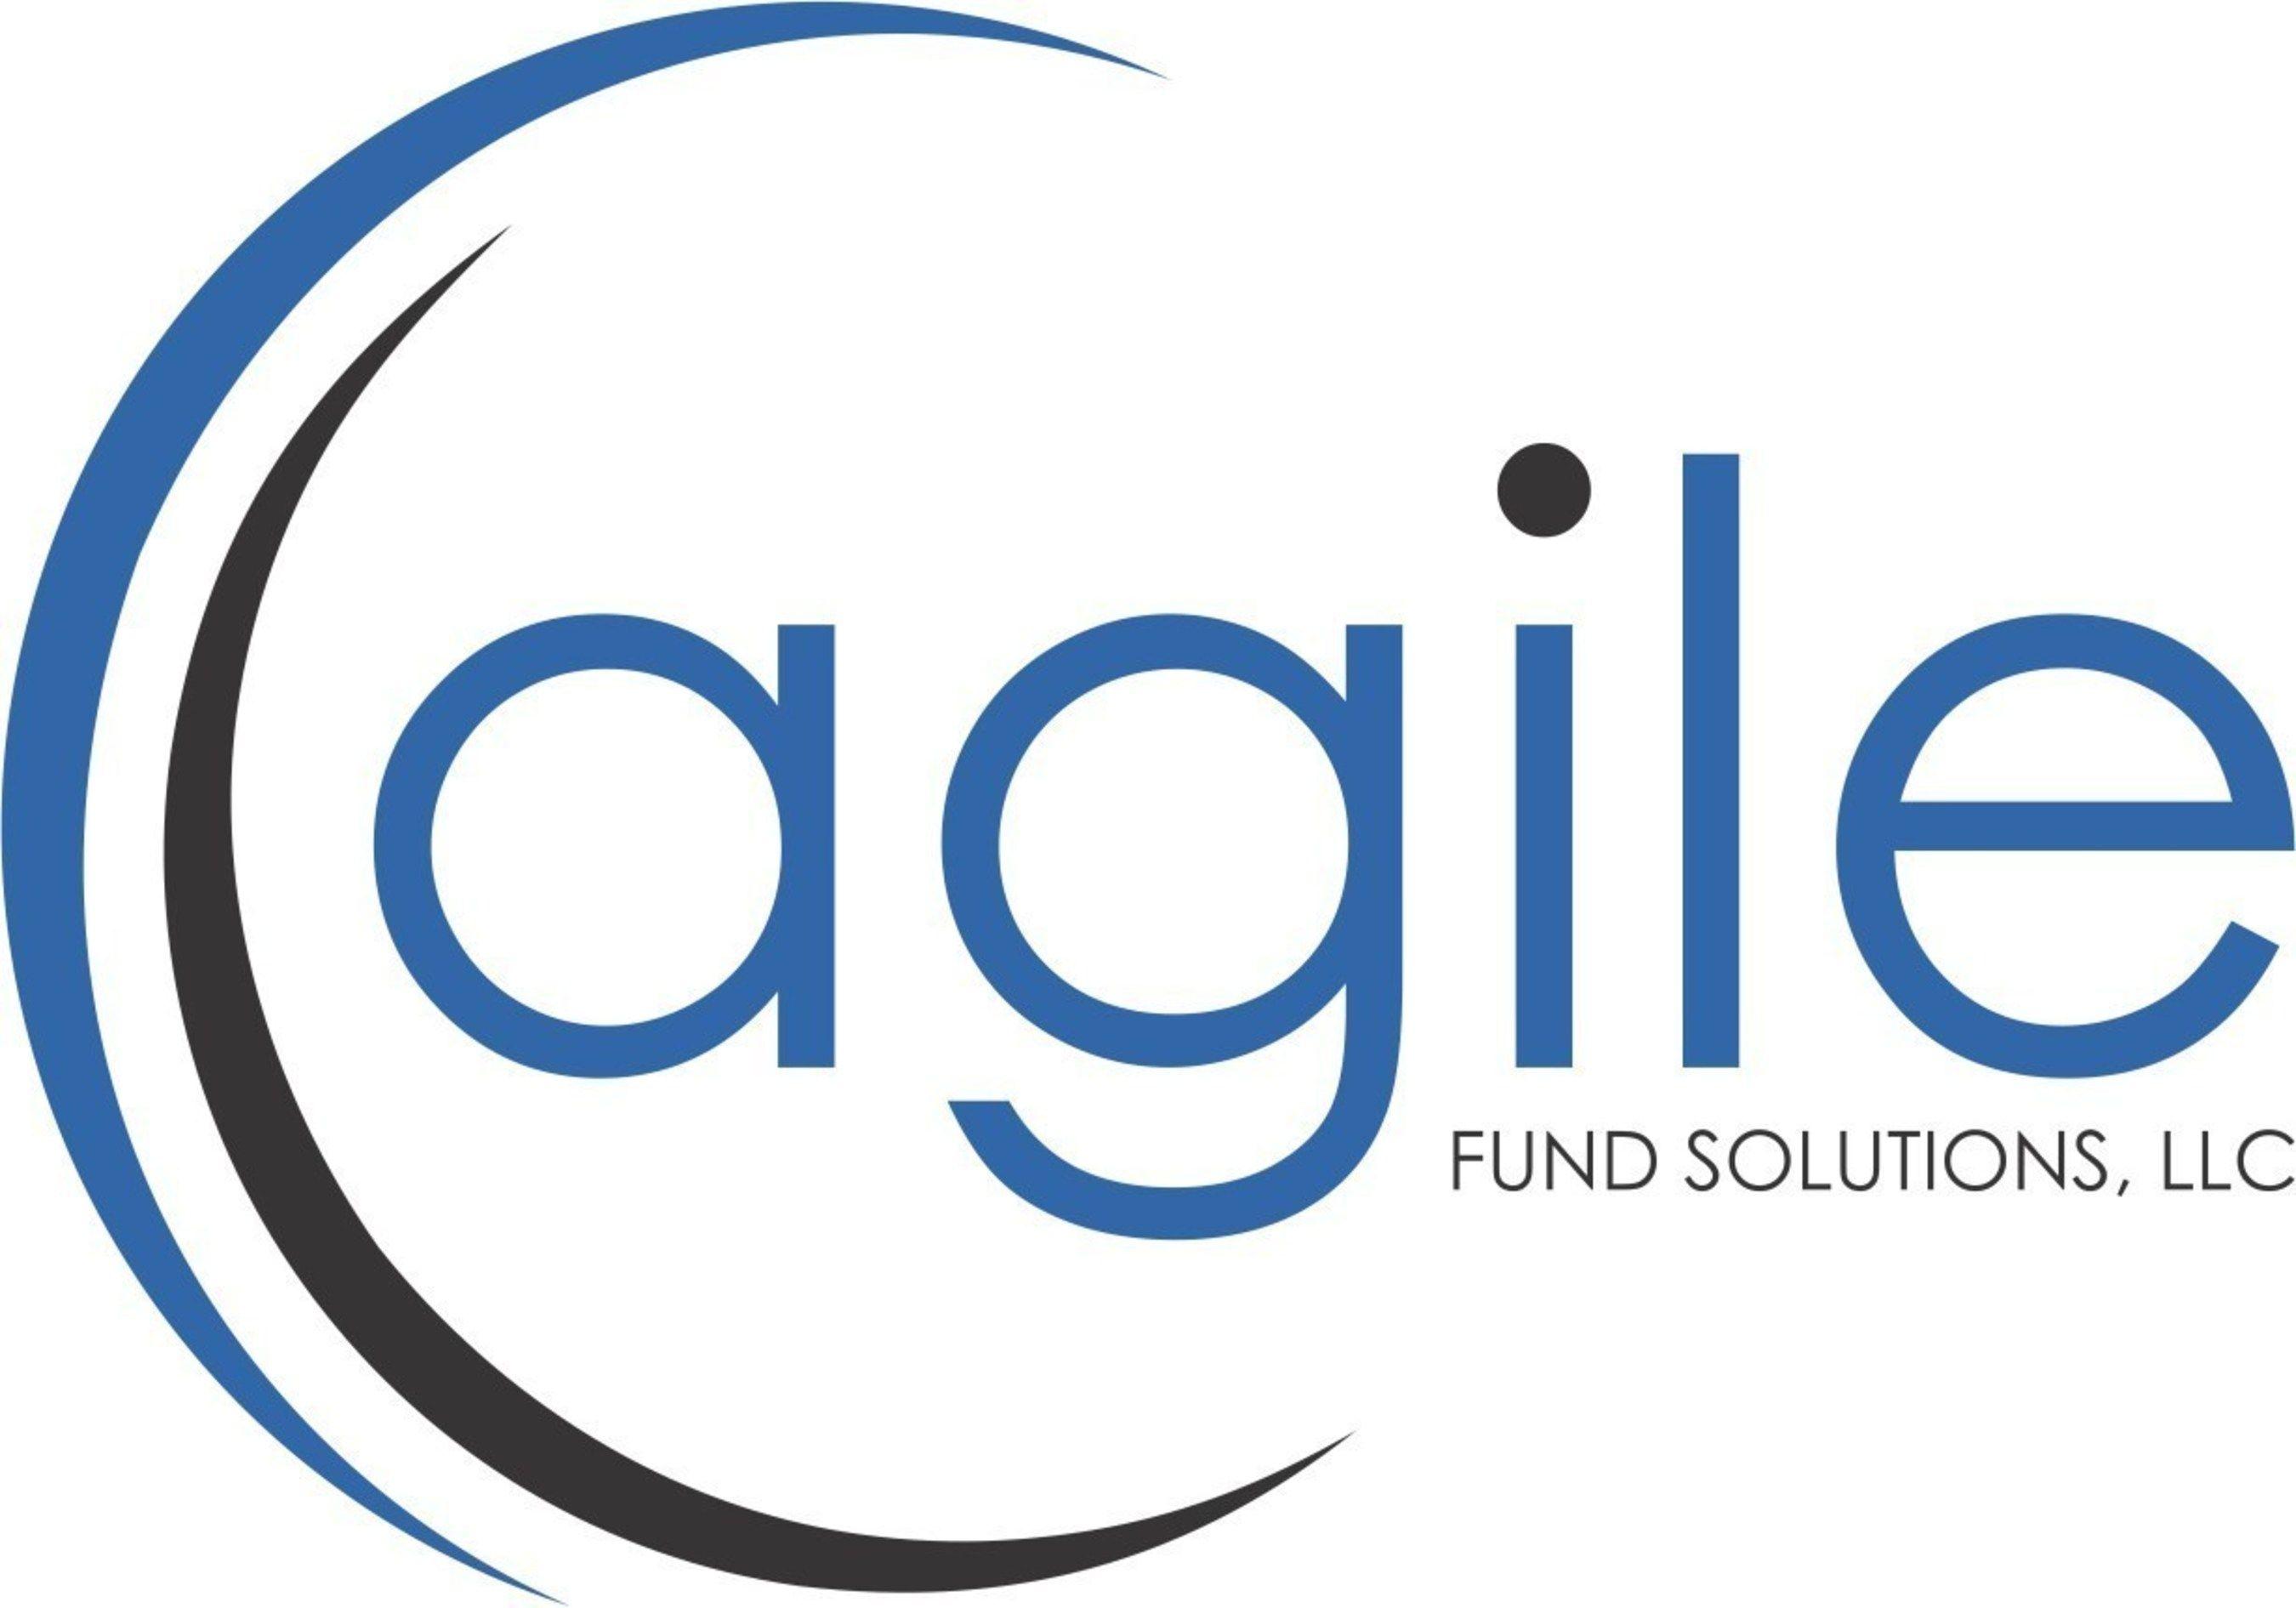 Agile Logo - New name, new logo, same great solutions